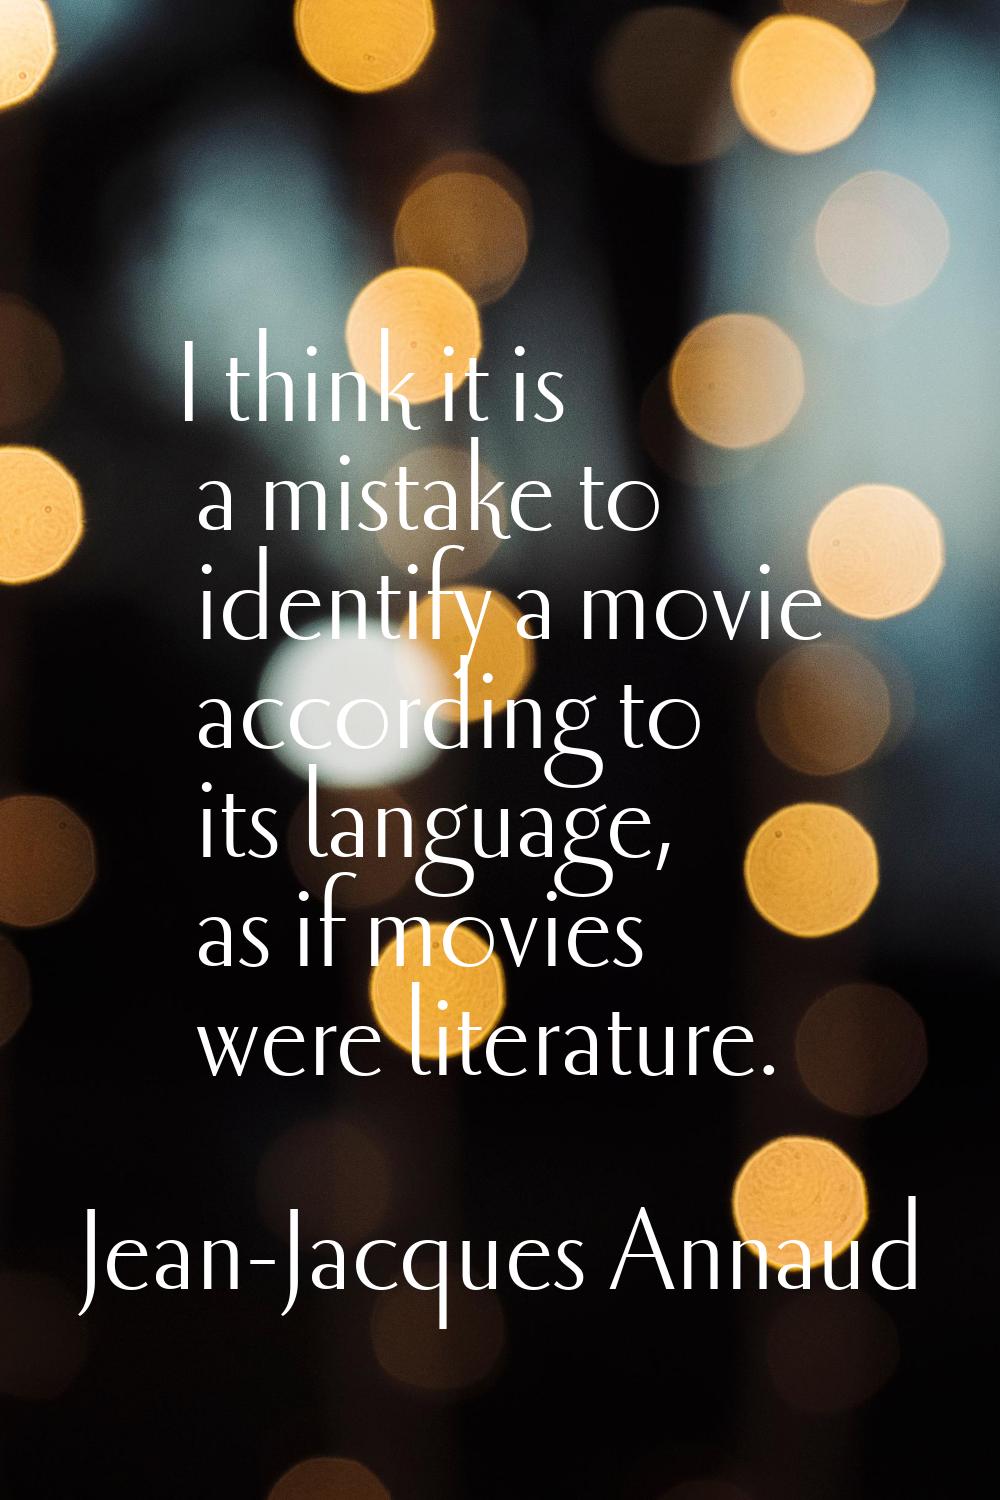 I think it is a mistake to identify a movie according to its language, as if movies were literature